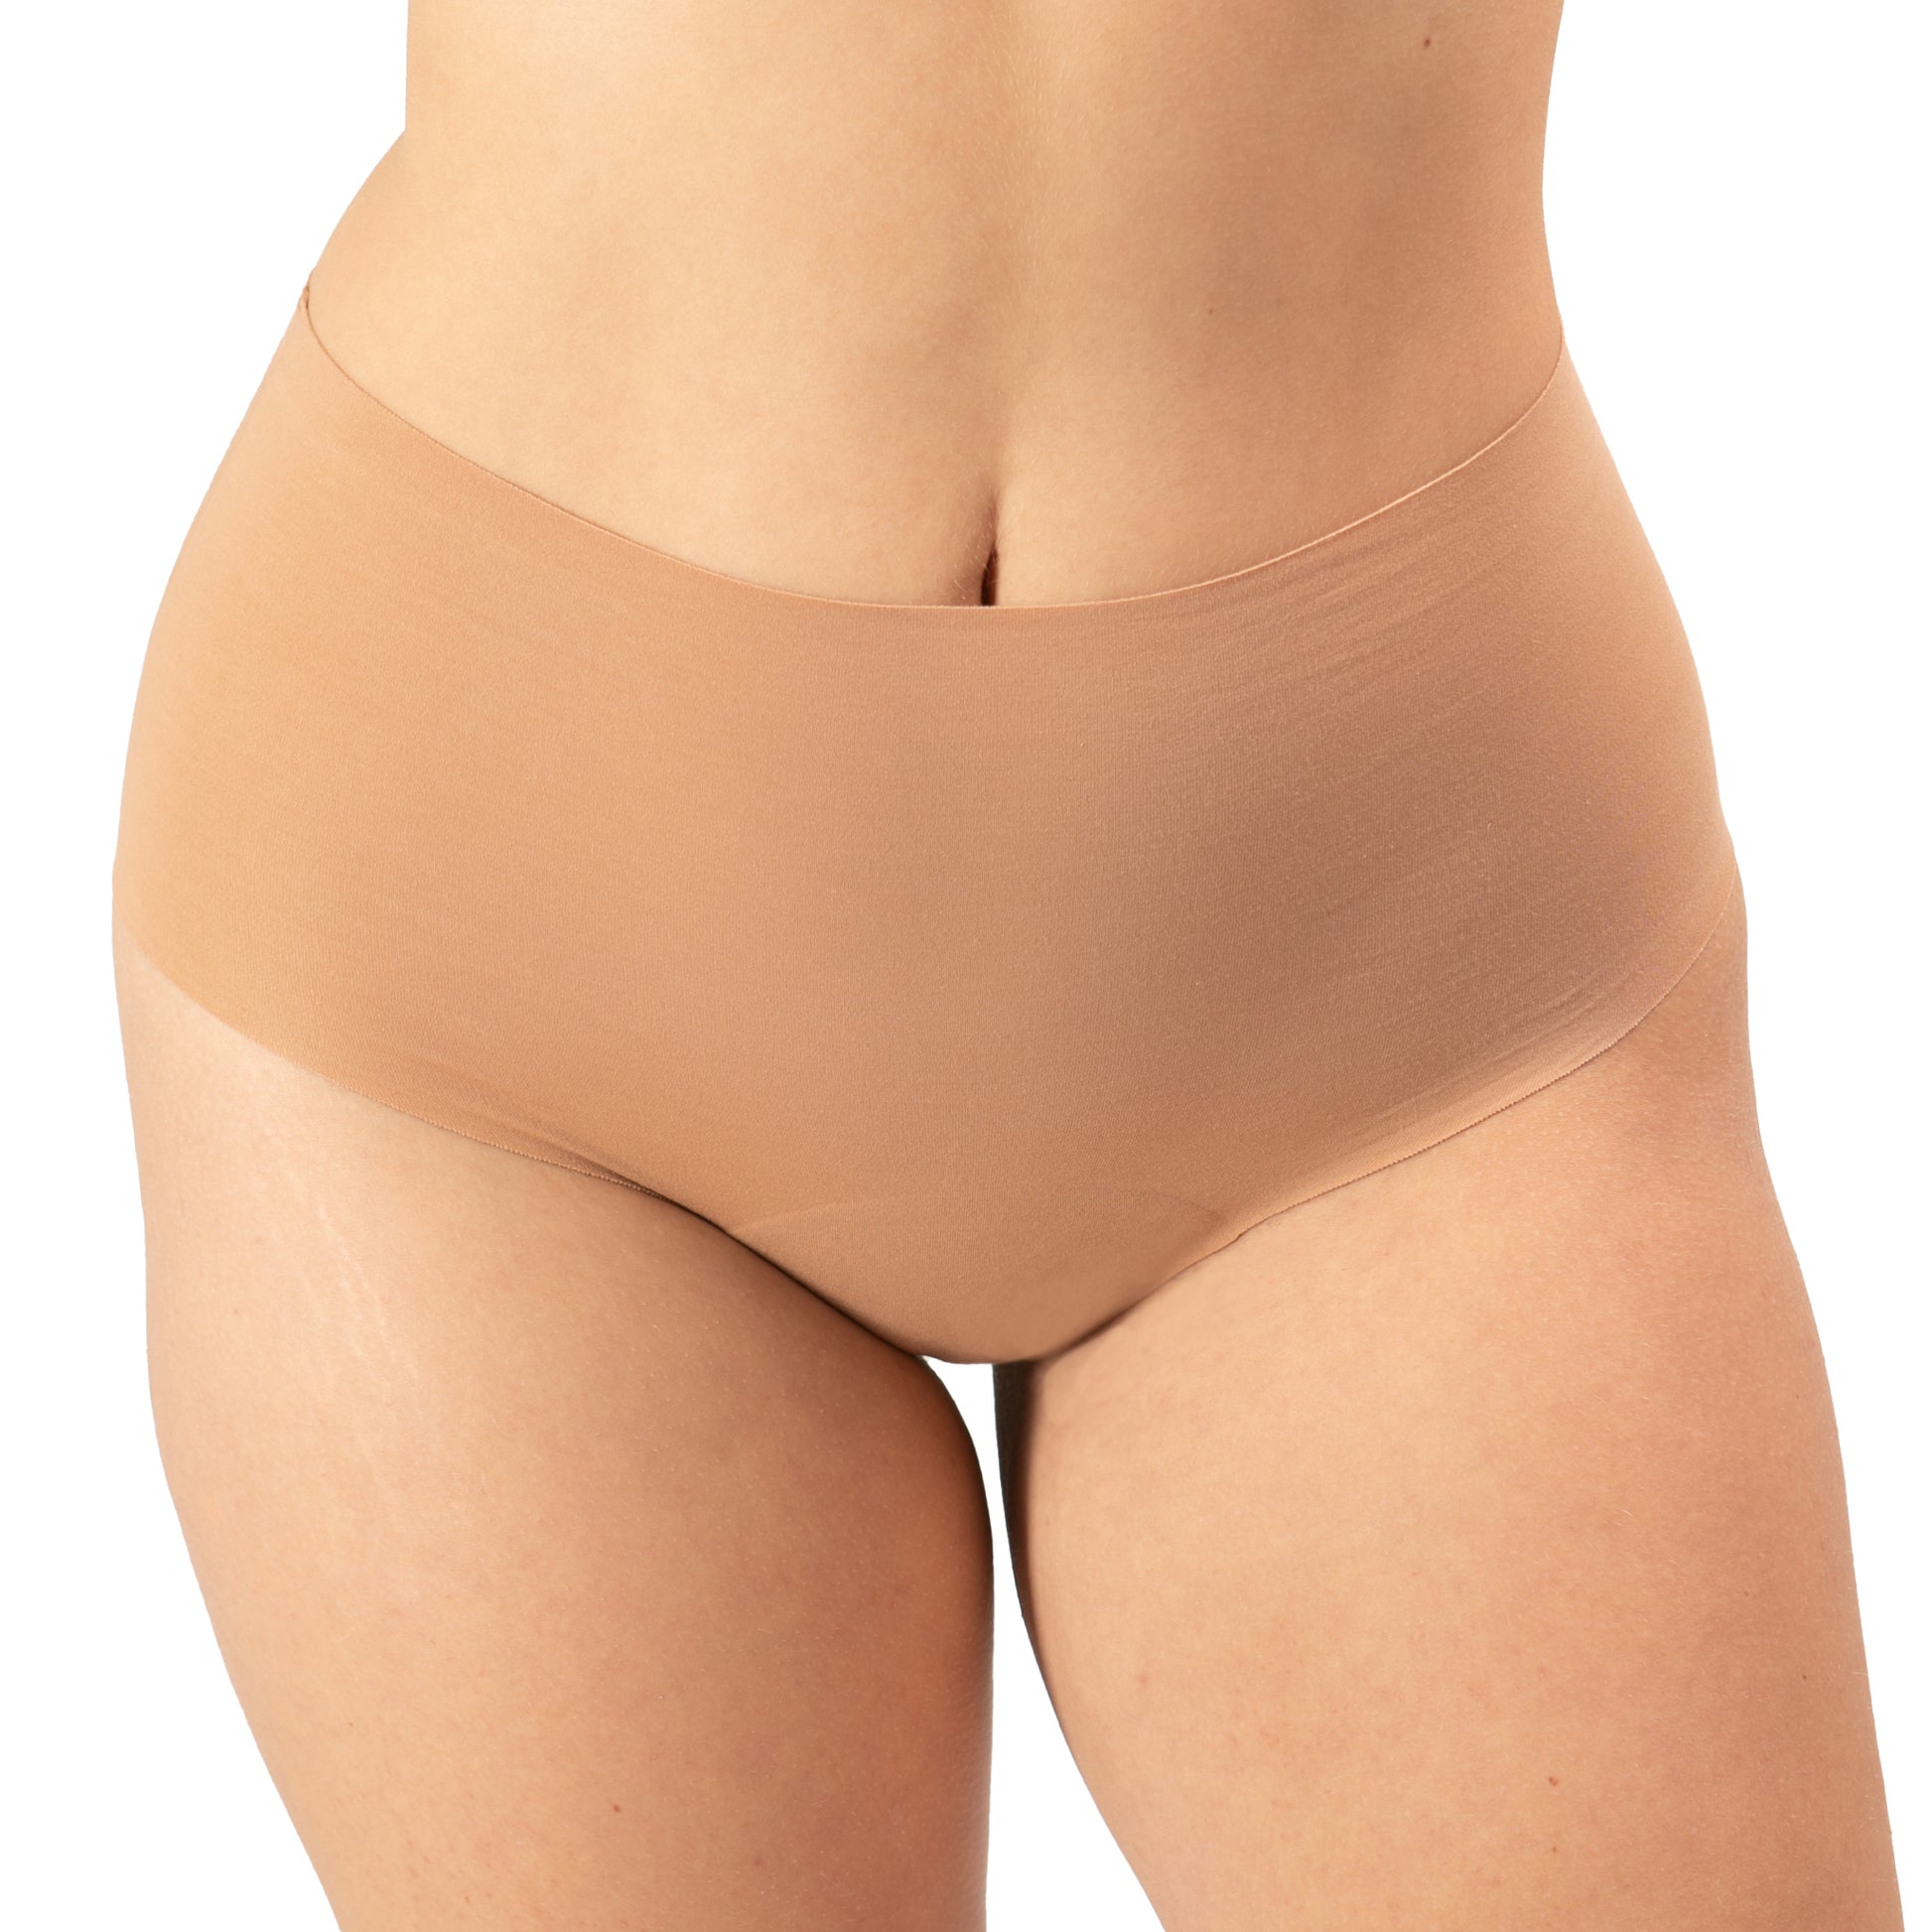 Women's High Waisted Bikini cotton underwear in the color sand - front view